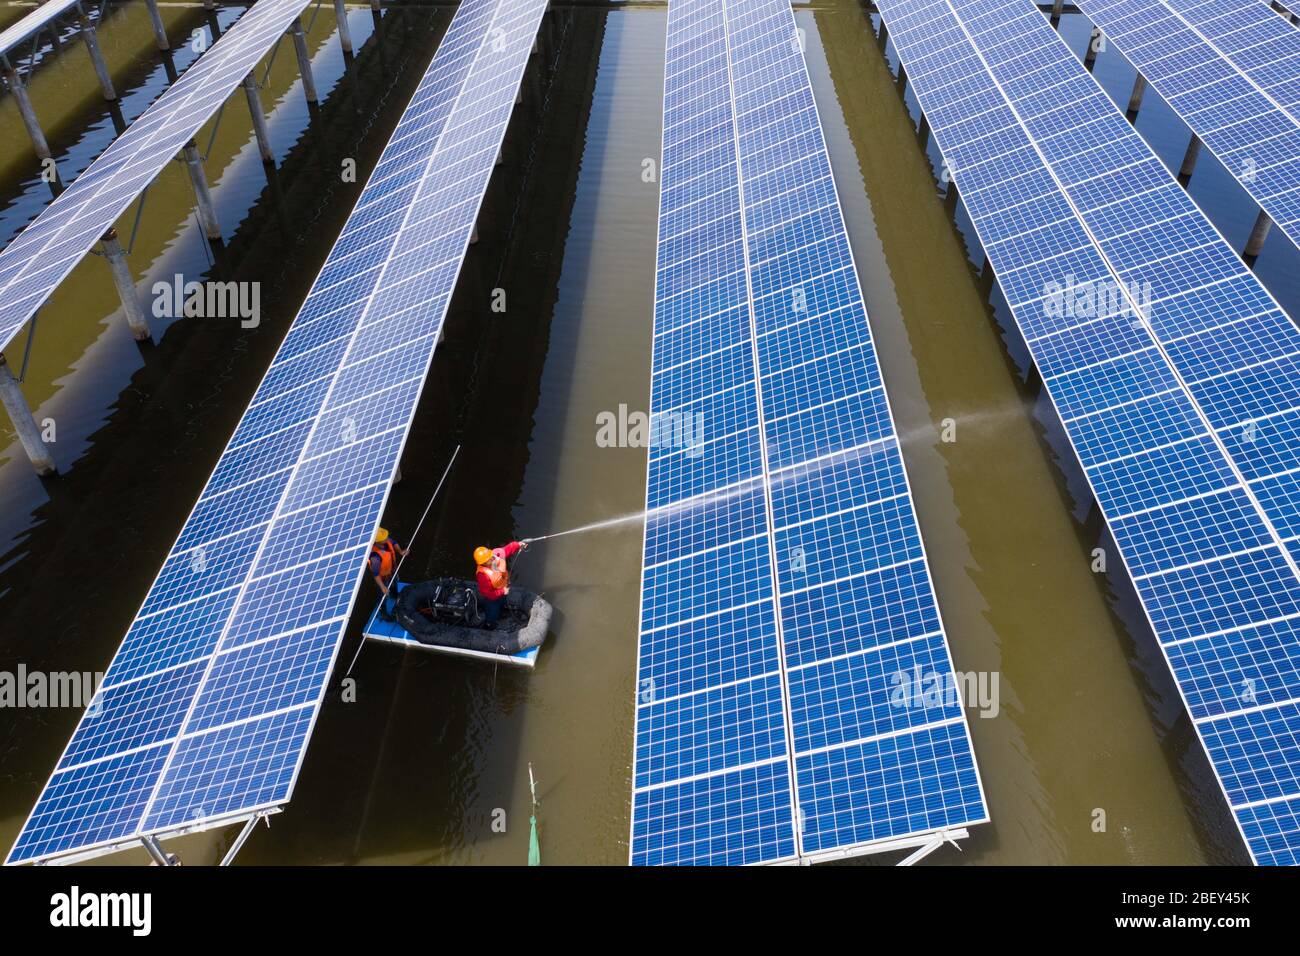 (200416) -- CHANGXING, April 16, 2020 (Xinhua) -- Aerial photo taken on April 16, 2020 shows workers on boat inspecting the operation of photovoltaic panels and cleaning photovoltaic modules at a fish farm in Gulong Village of Changxing County, east China's Zhejiang Province.  The fish farm, covering an area of 500 mu (about 33.3 hectares), is used to raise fish and, at the same time, to generate electricity after photovoltaic panels are installed on its surface.    Generating more than 20 million kilowatt-hour electricity annually, the application of photovoltaic panels can create a revenue o Stock Photo